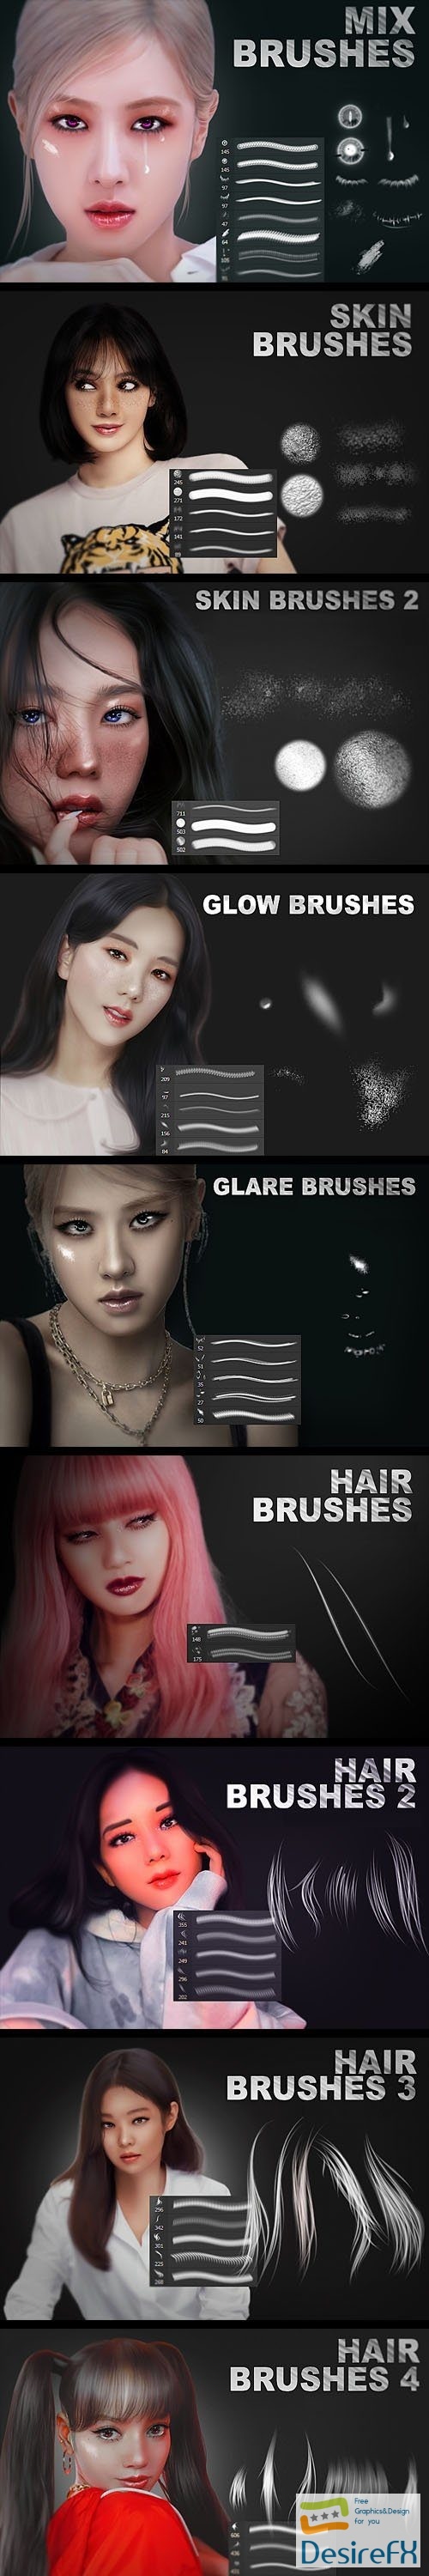 10+ Beauty Brushes Packs for Photoshop